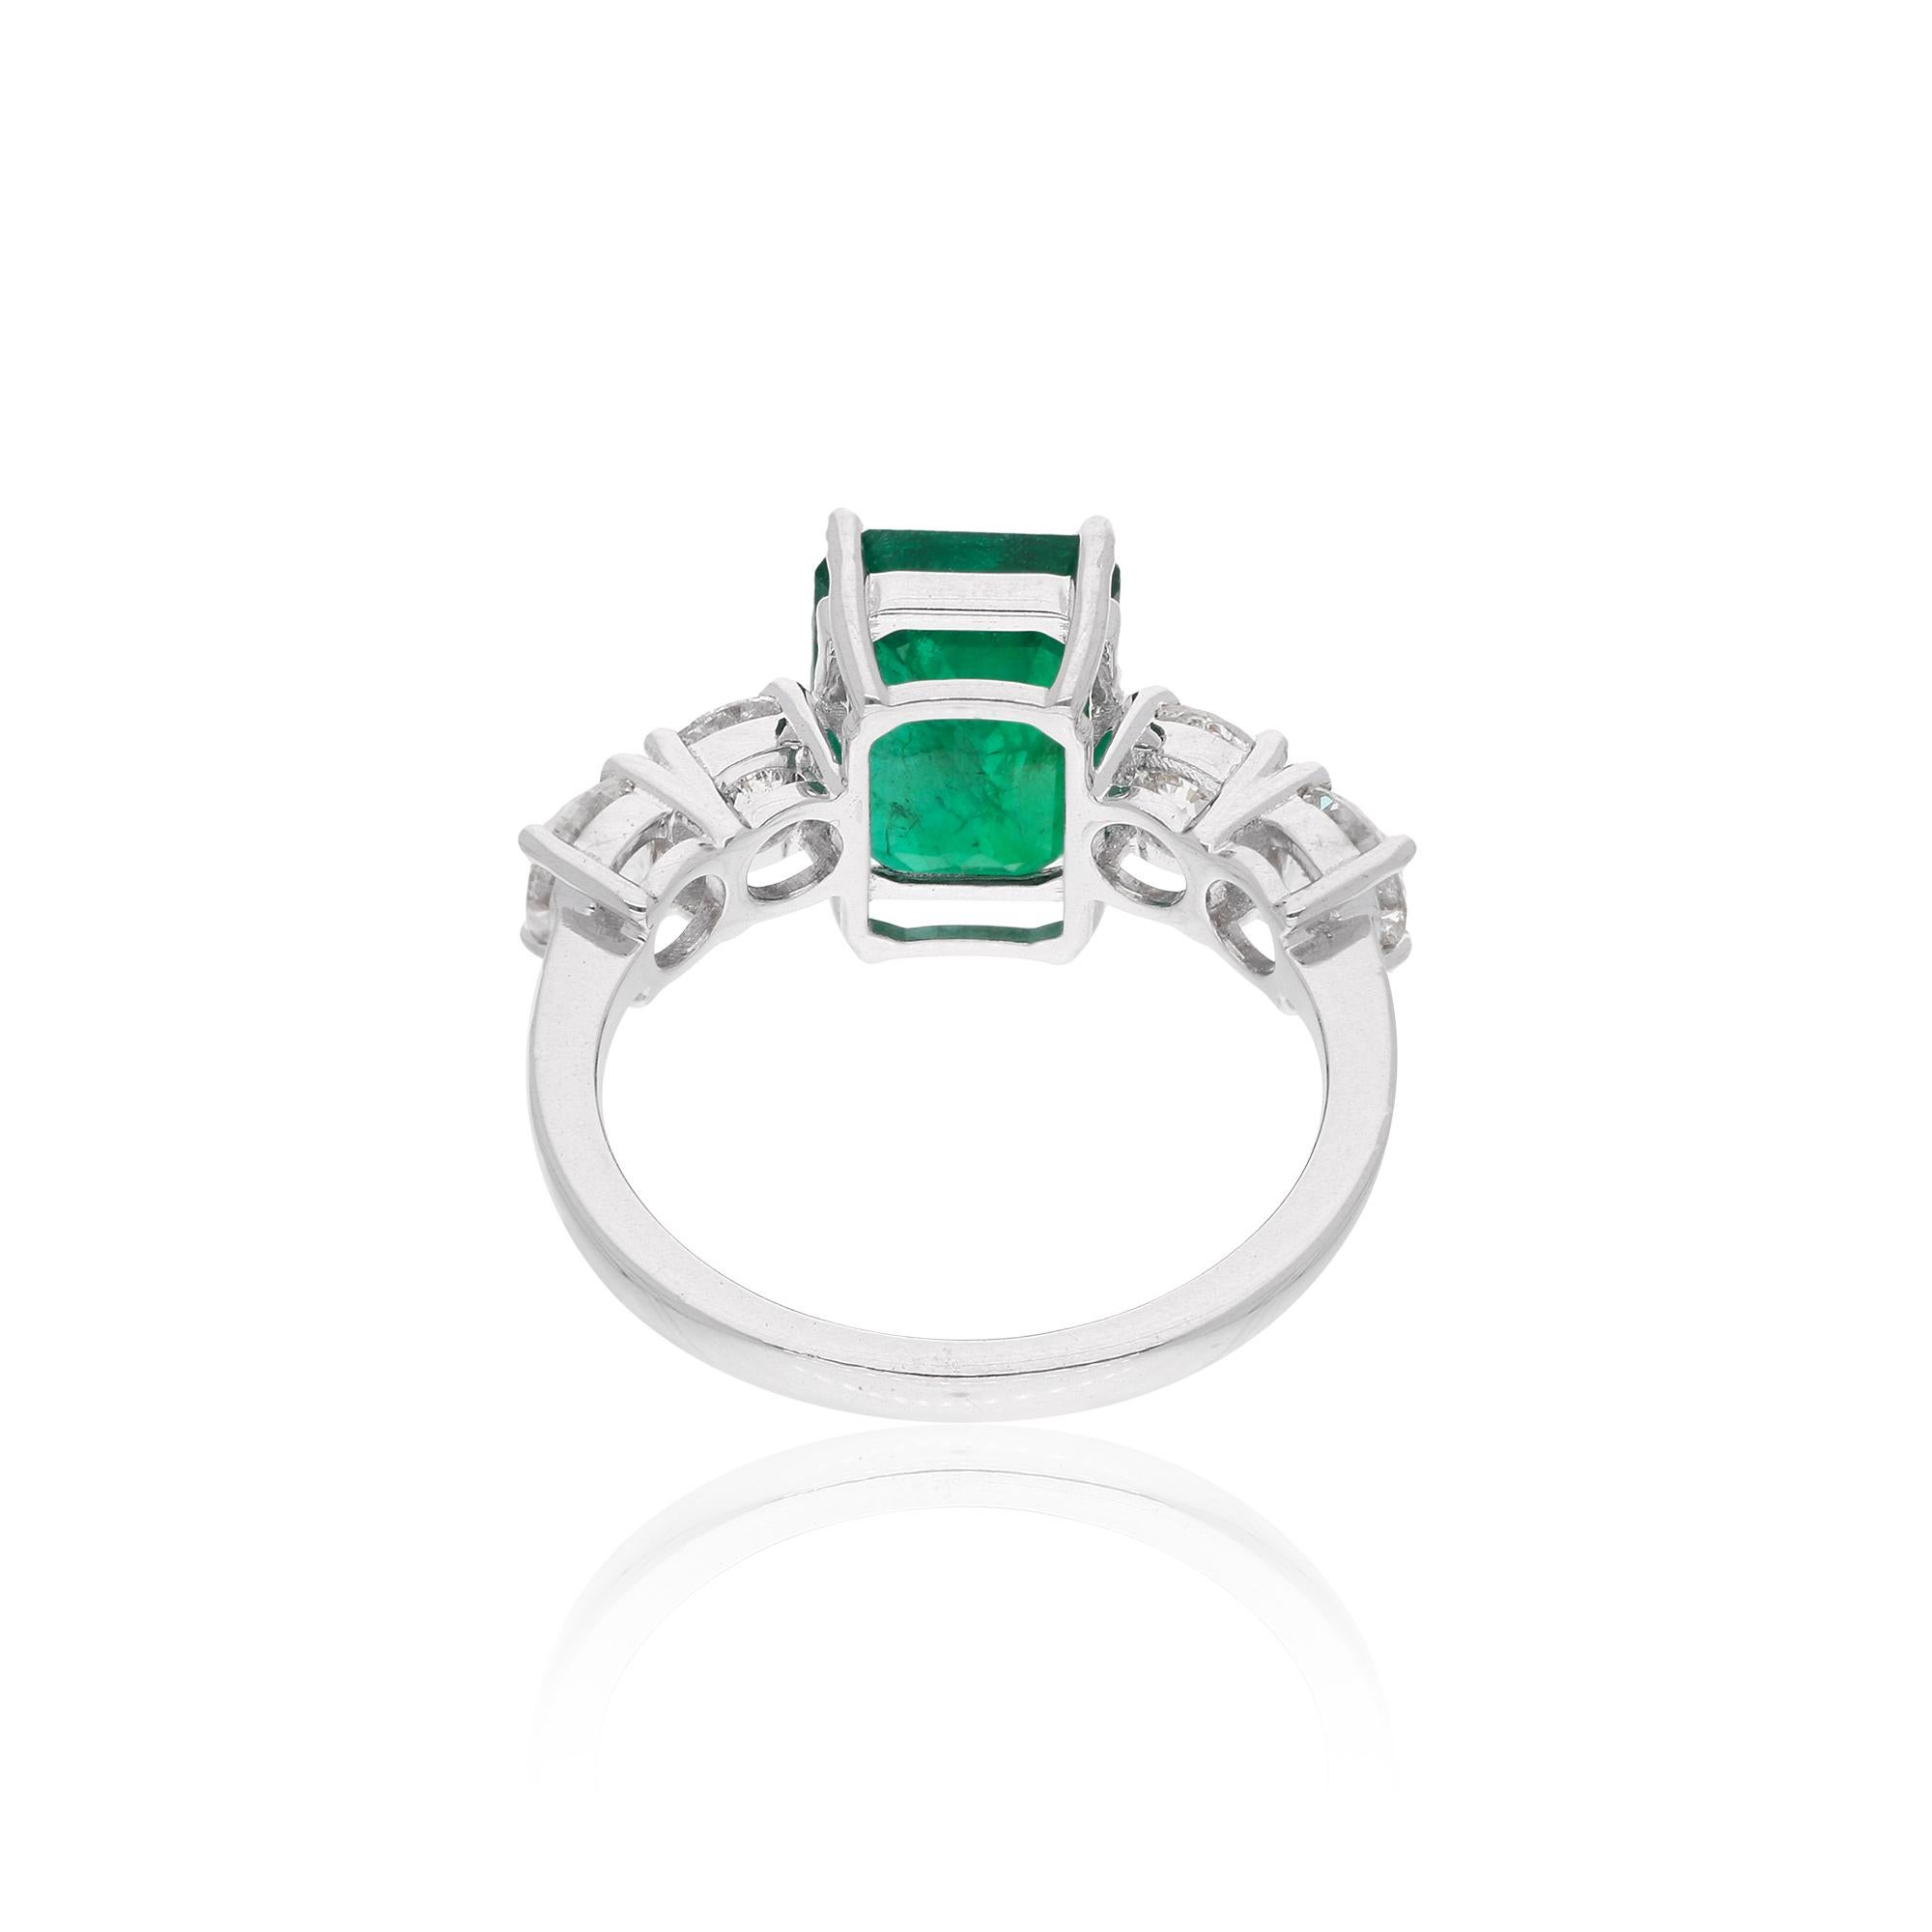 Item Code :- SER-22770
Gross Wt. :- 4.42 gm
Solid 18k White Gold Wt. :- 3.56 gm
Natural Diamond Wt. :- 1.41 Ct. ( AVERAGE DIAMOND CLARITY SI1-SI2 & COLOR H-I )
Zambian Emerald Wt. :- 2.88 Ct.
Ring Size :- 7 US & All size available

✦